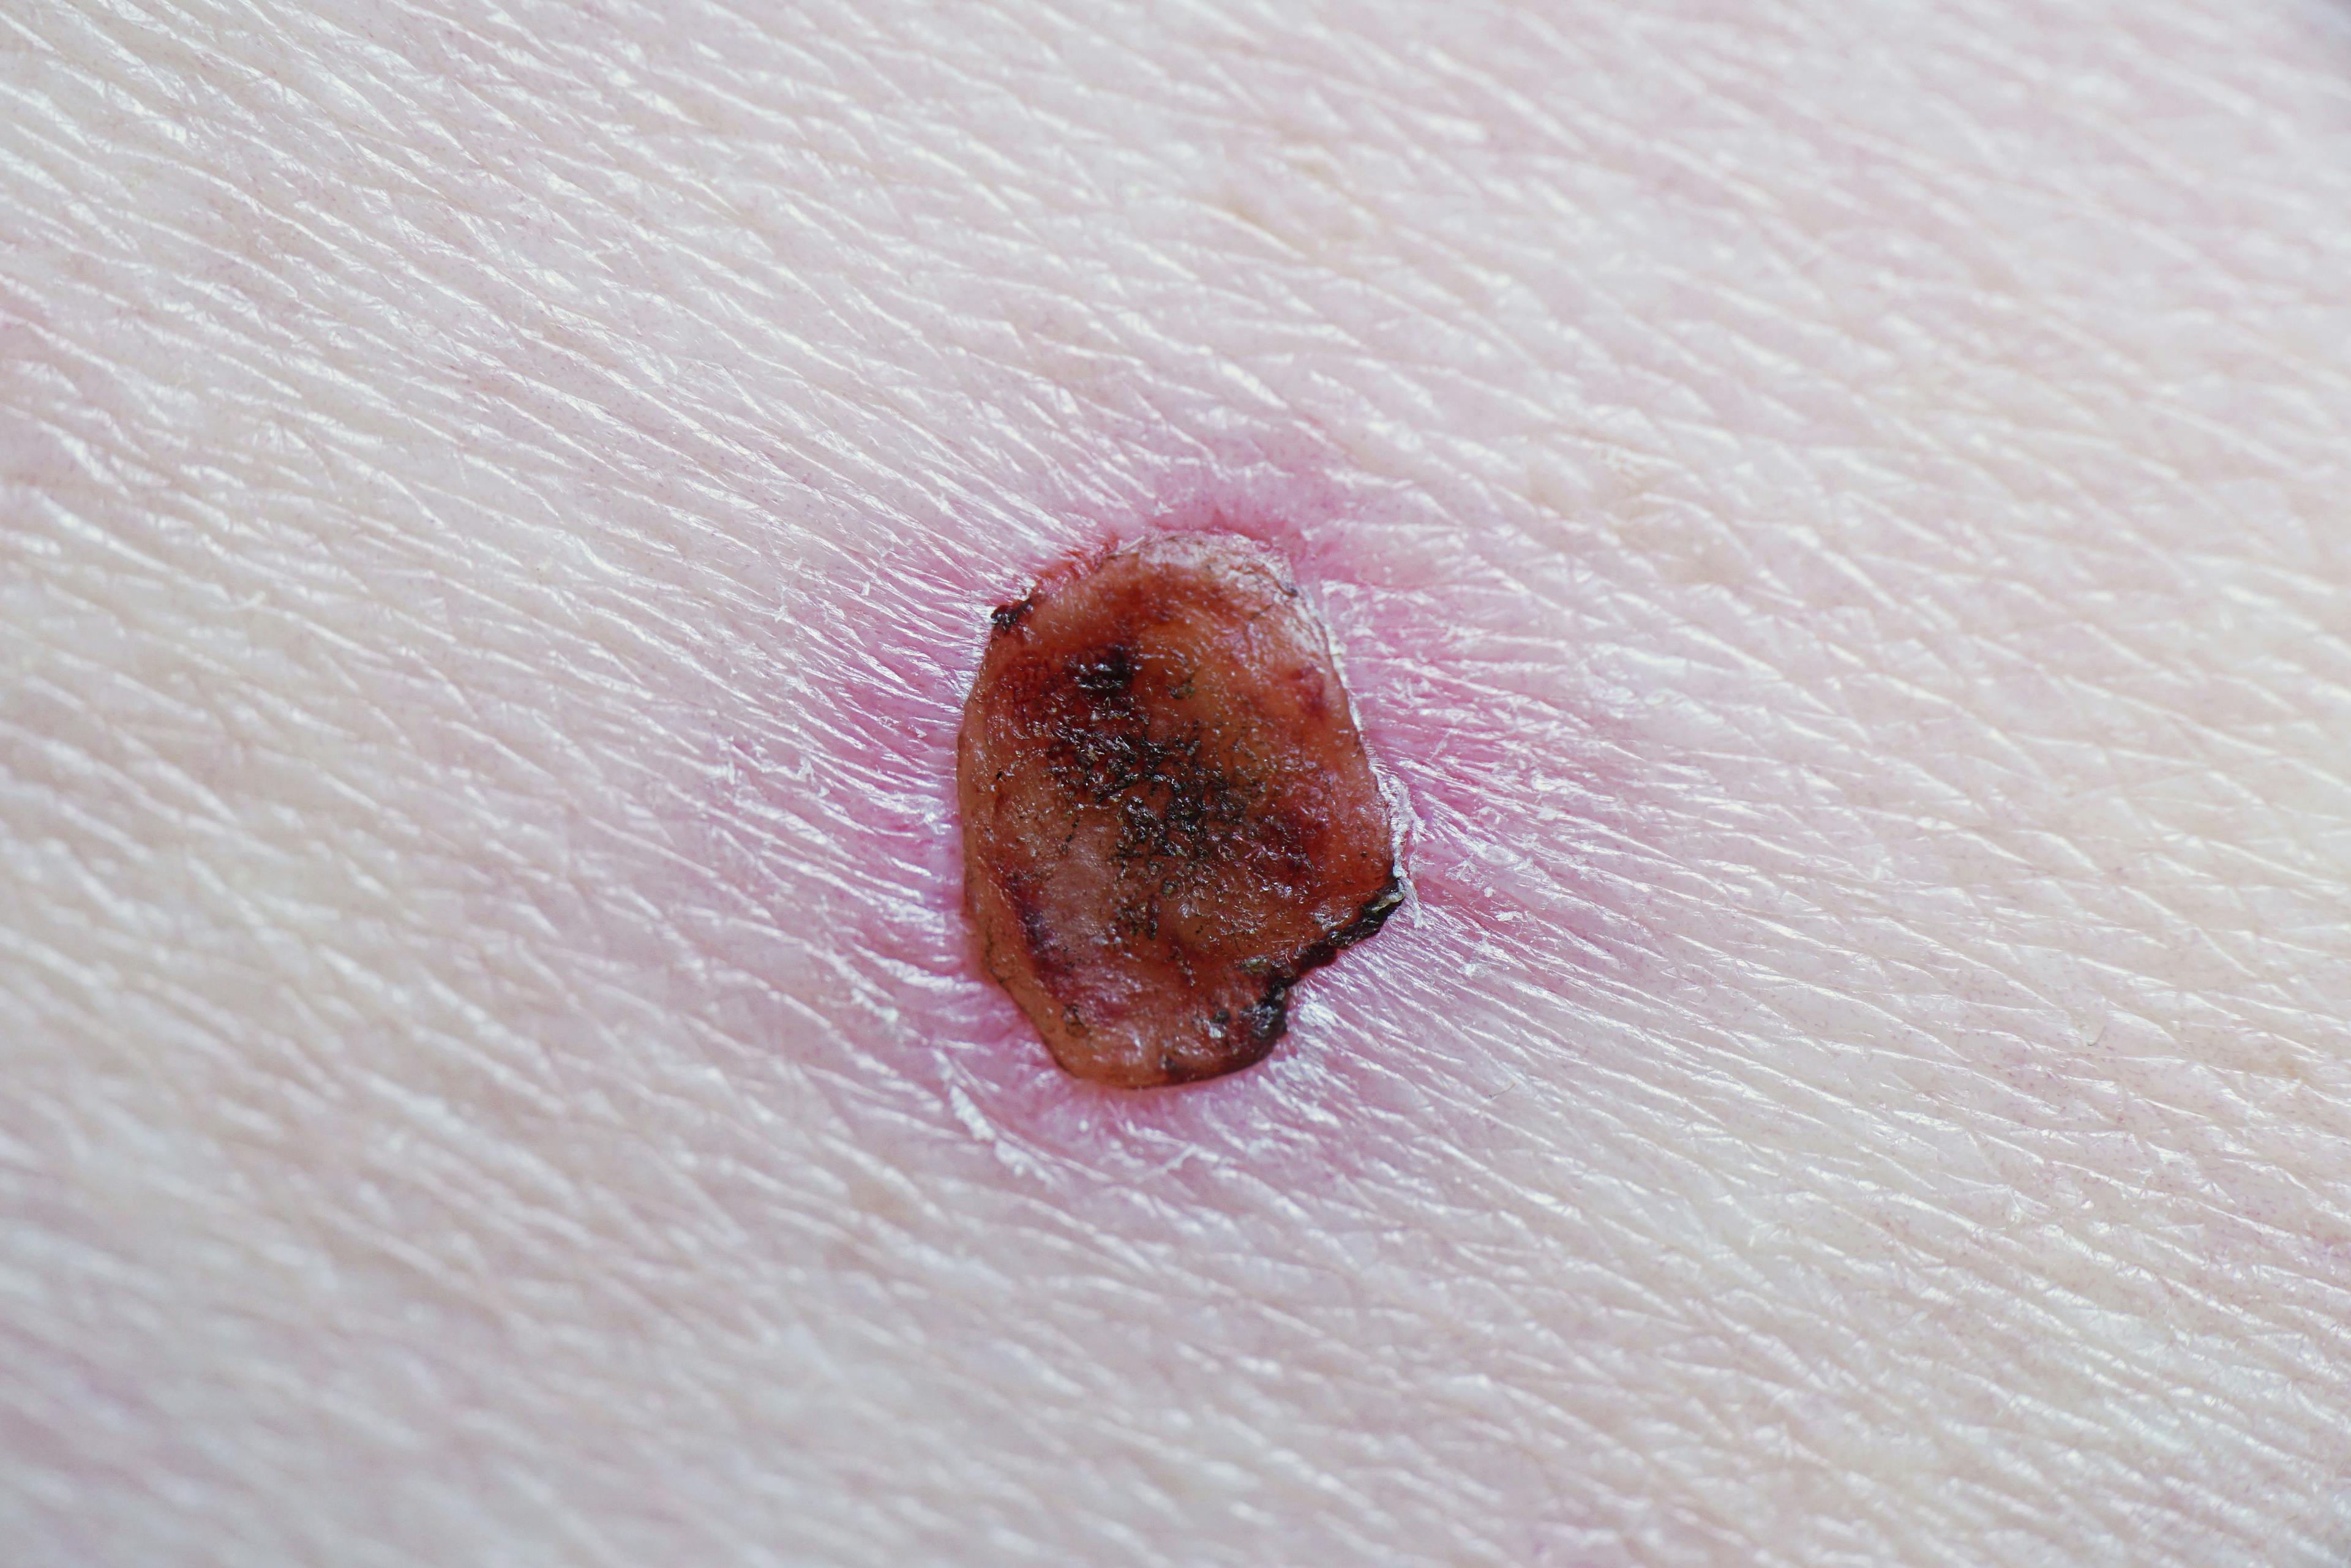 Review Explores Advanced Basal Cell Carcinoma Mechanisms and Targeted Therapies